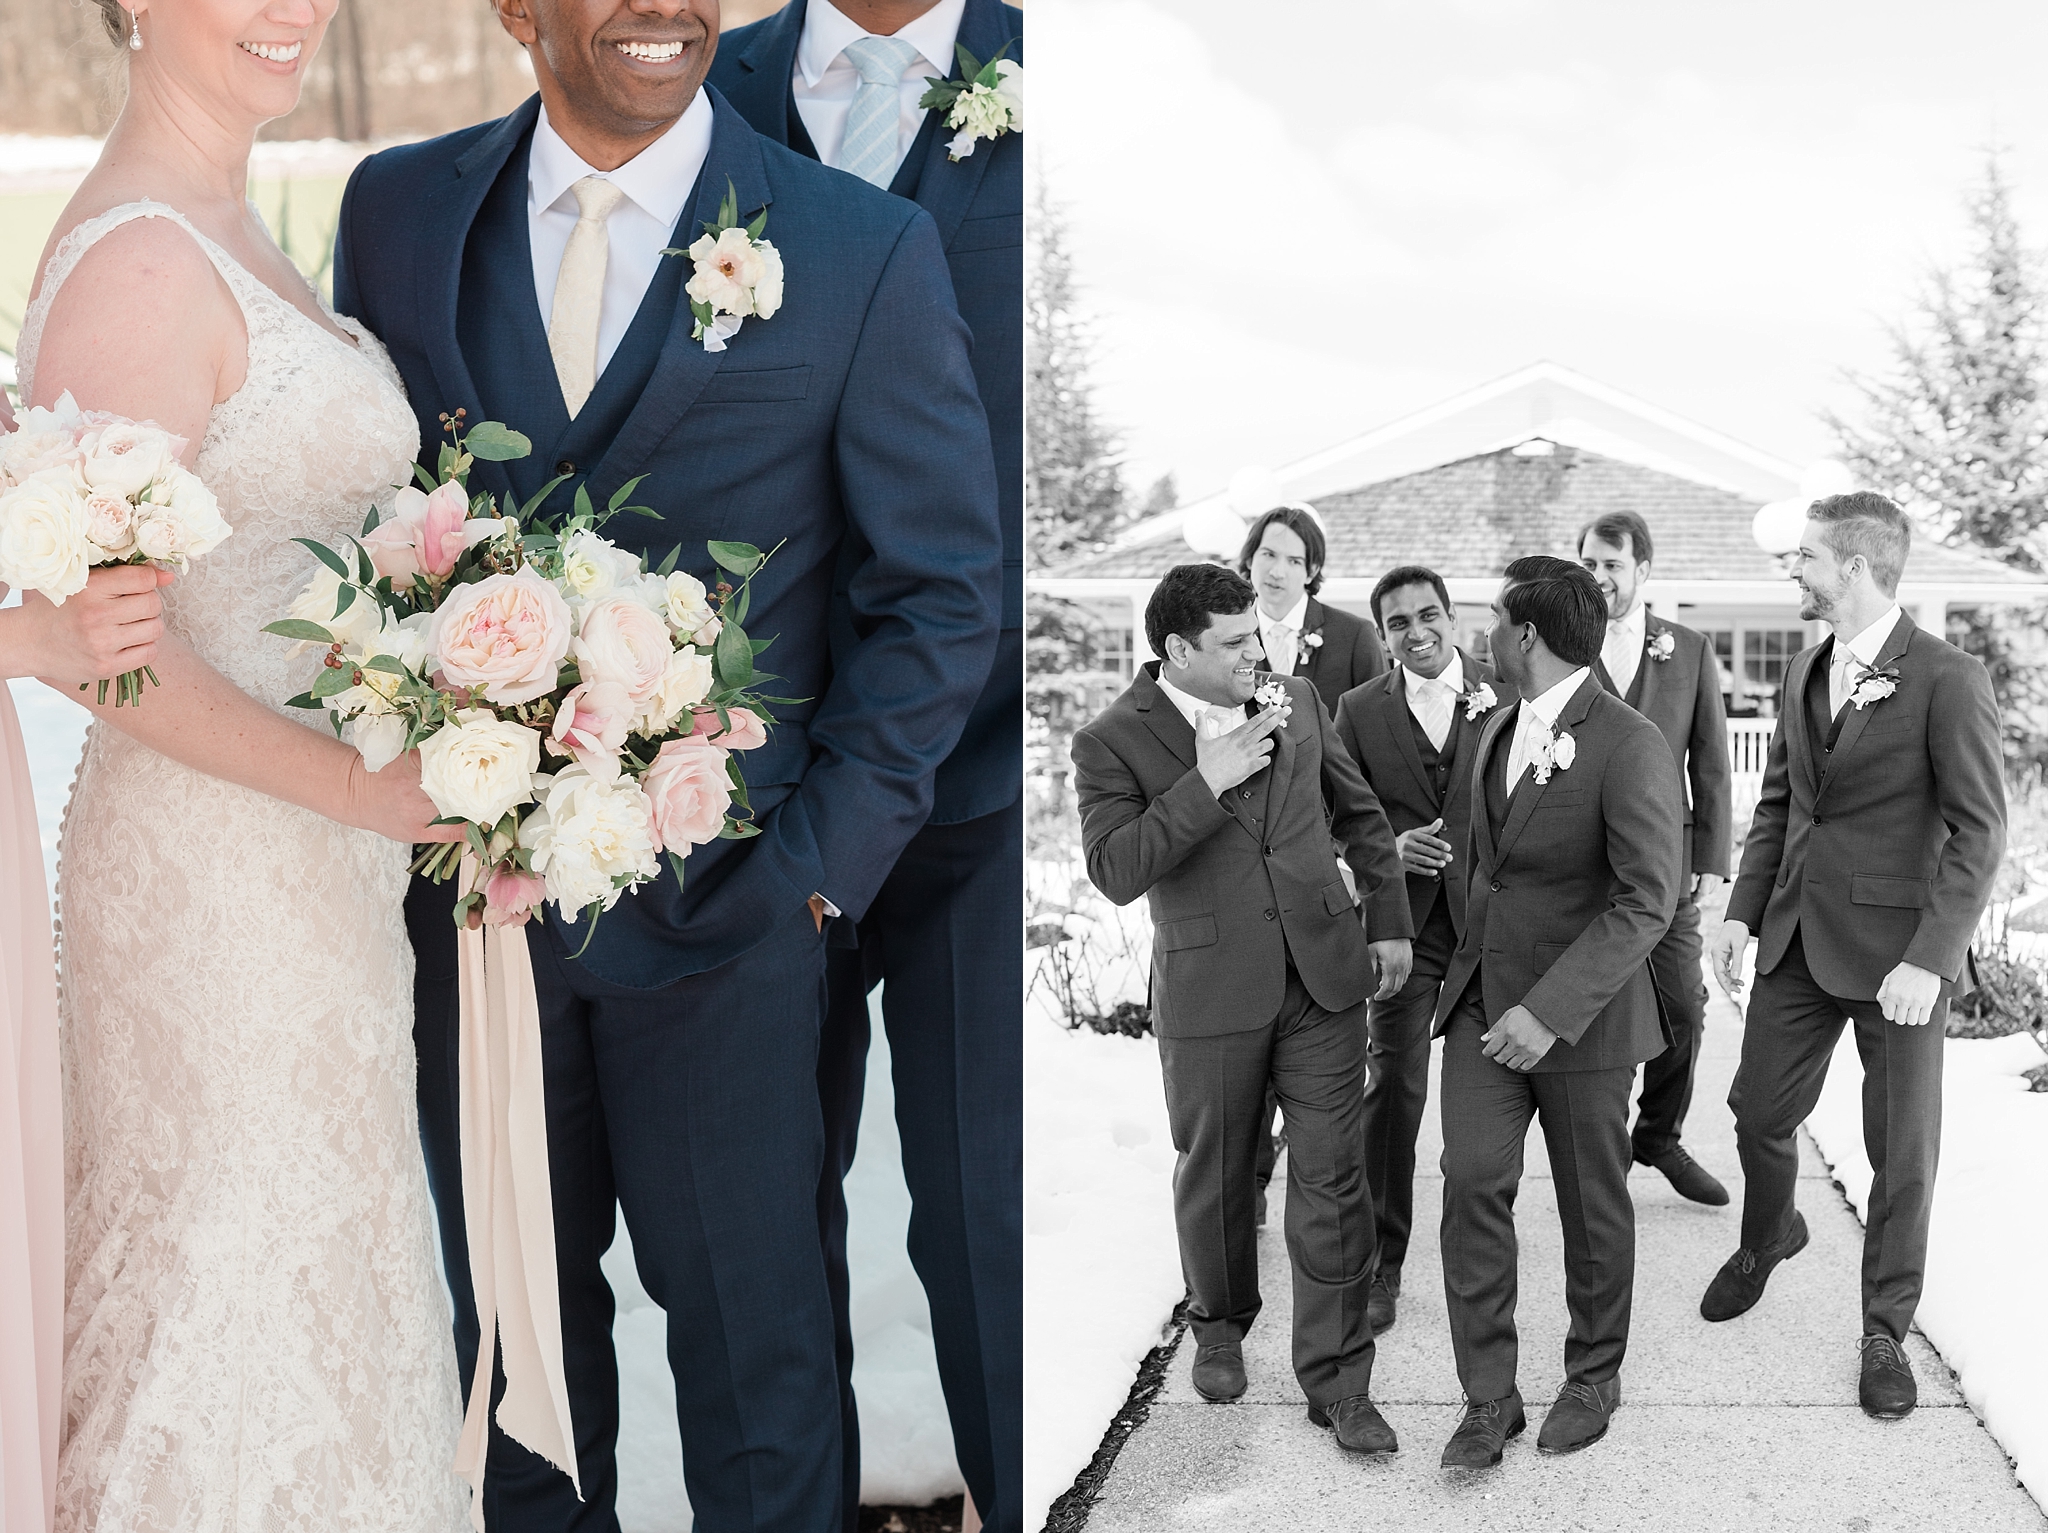 This romantic English garden wedding at Antrim 1844 in Taneytown, MD was planned by Eastmade Events and photographed by DC photographer, Alicia Lacey.  